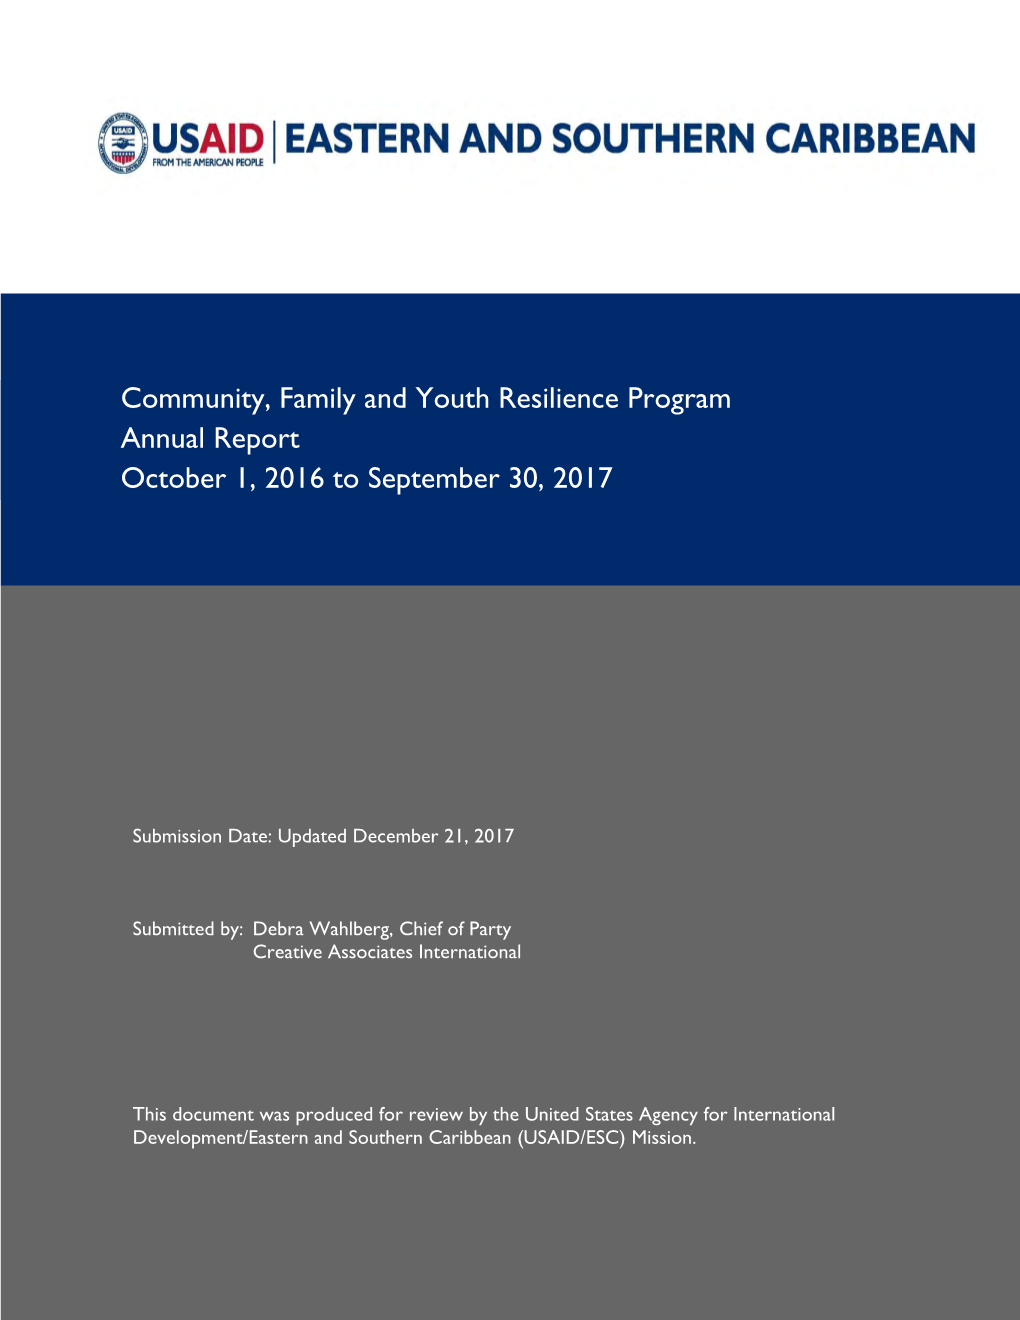 Community, Family and Youth Resilience Program Annual Report October 1, 2016 to September 30, 2017